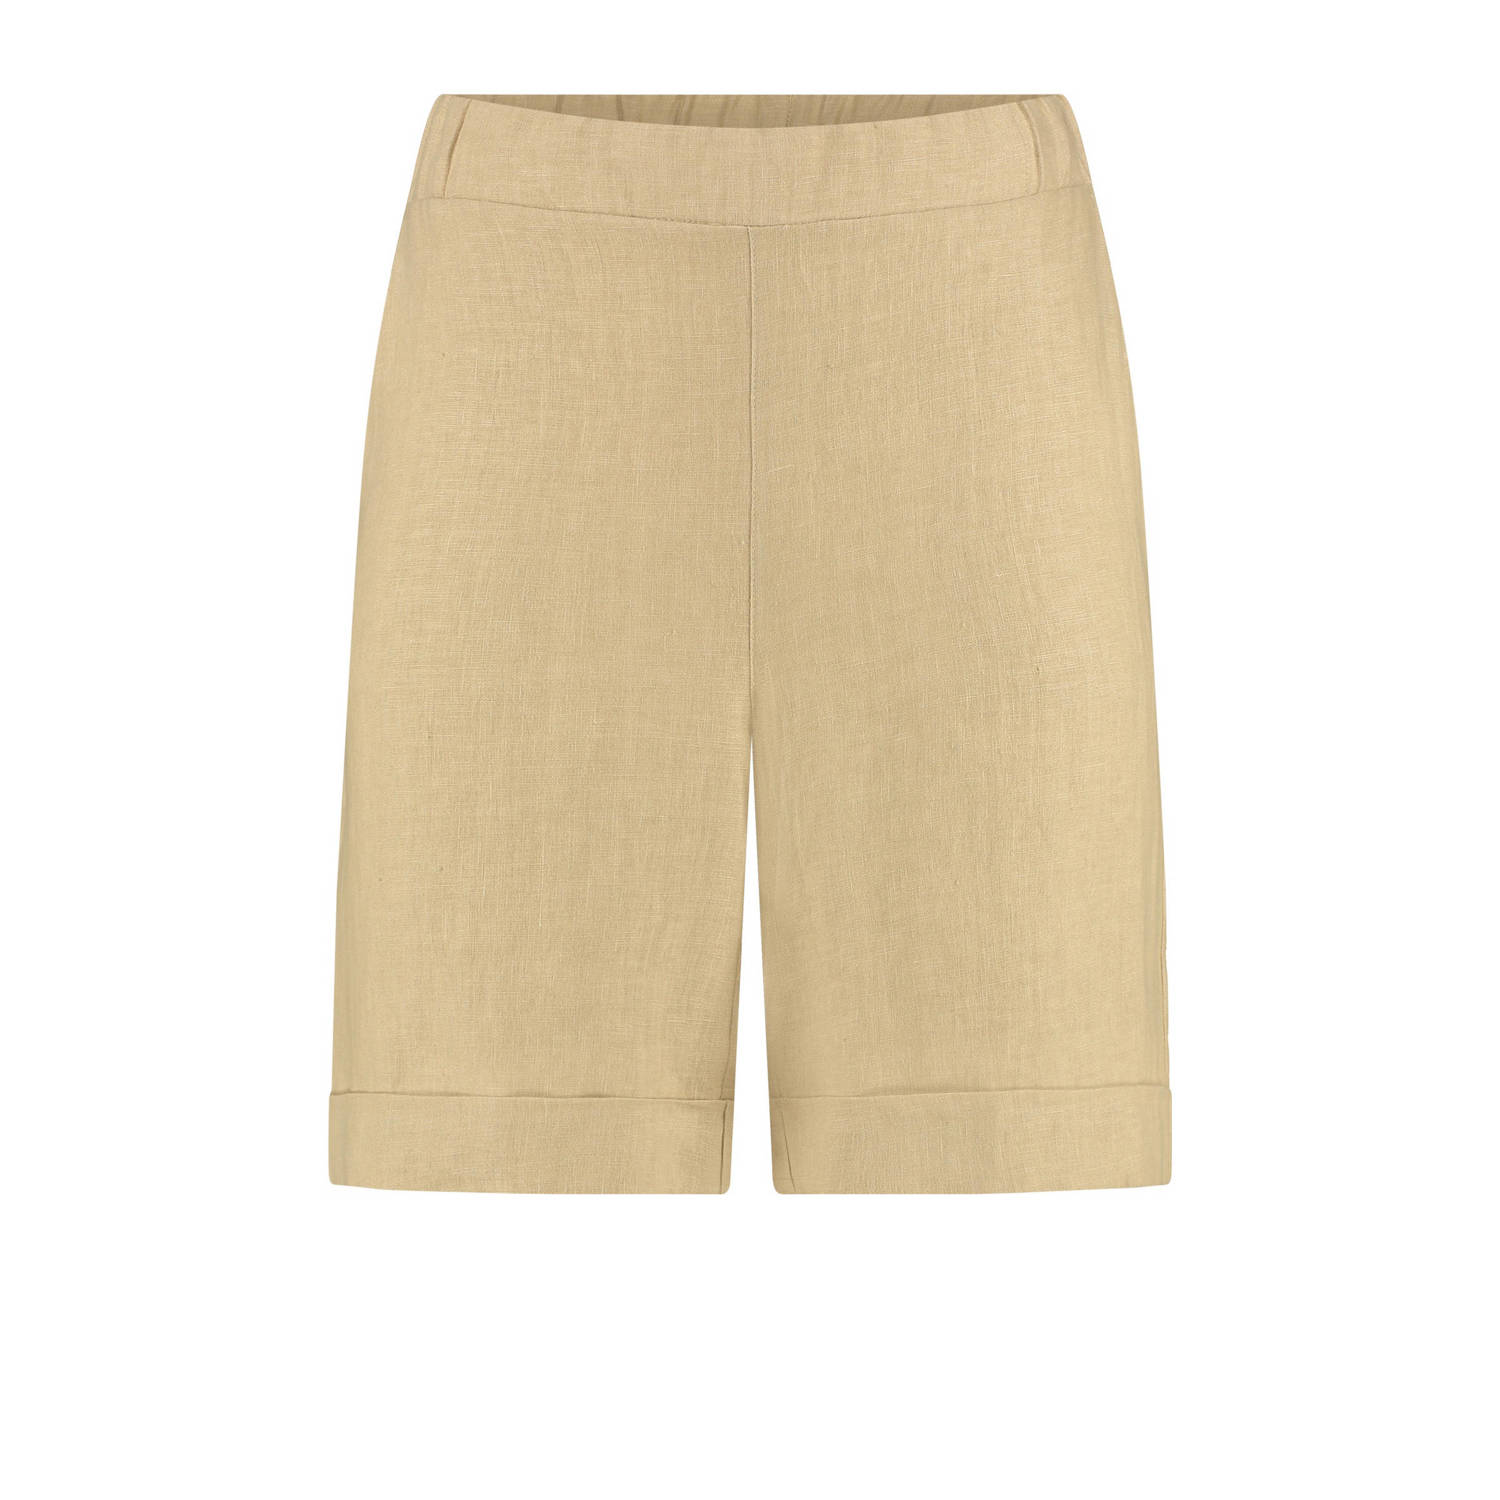 Claudia Sträter relaxed short beige